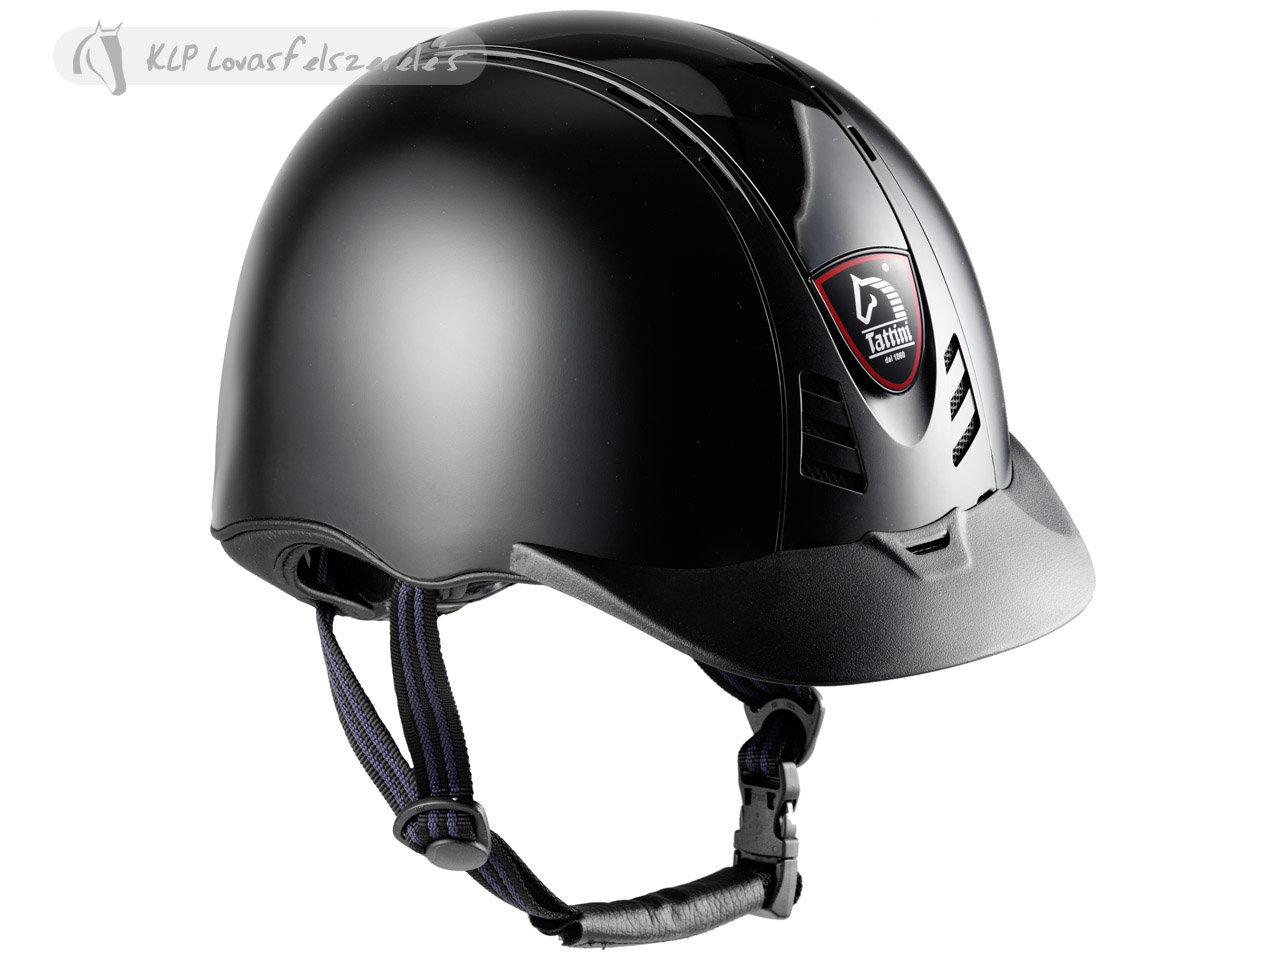 Tattini Polycarbonate Riding Cap With Exchangeable Plate